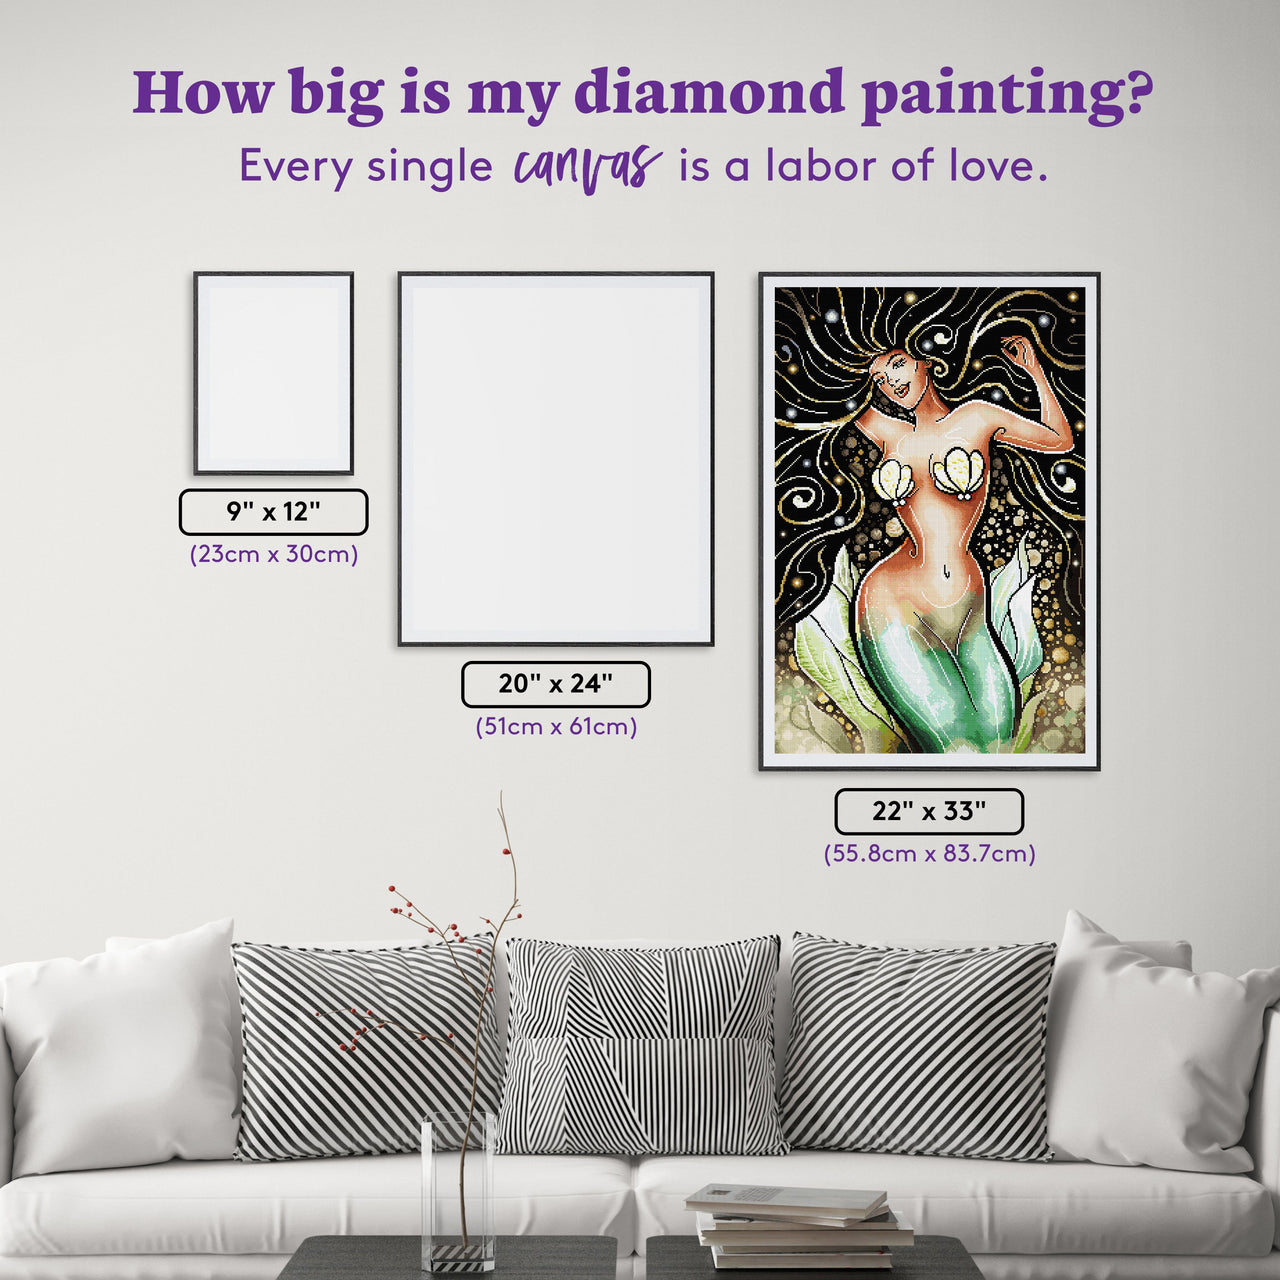 Diamond Painting Love to See You Shine 22" x 33" (55.8cm x 83.7cm) / Square with 54 Colors including 1 ABs and 4 Iridescent Diamonds and 1 Special Diamonds and 3 Fairy Dust Diamonds / 75,176